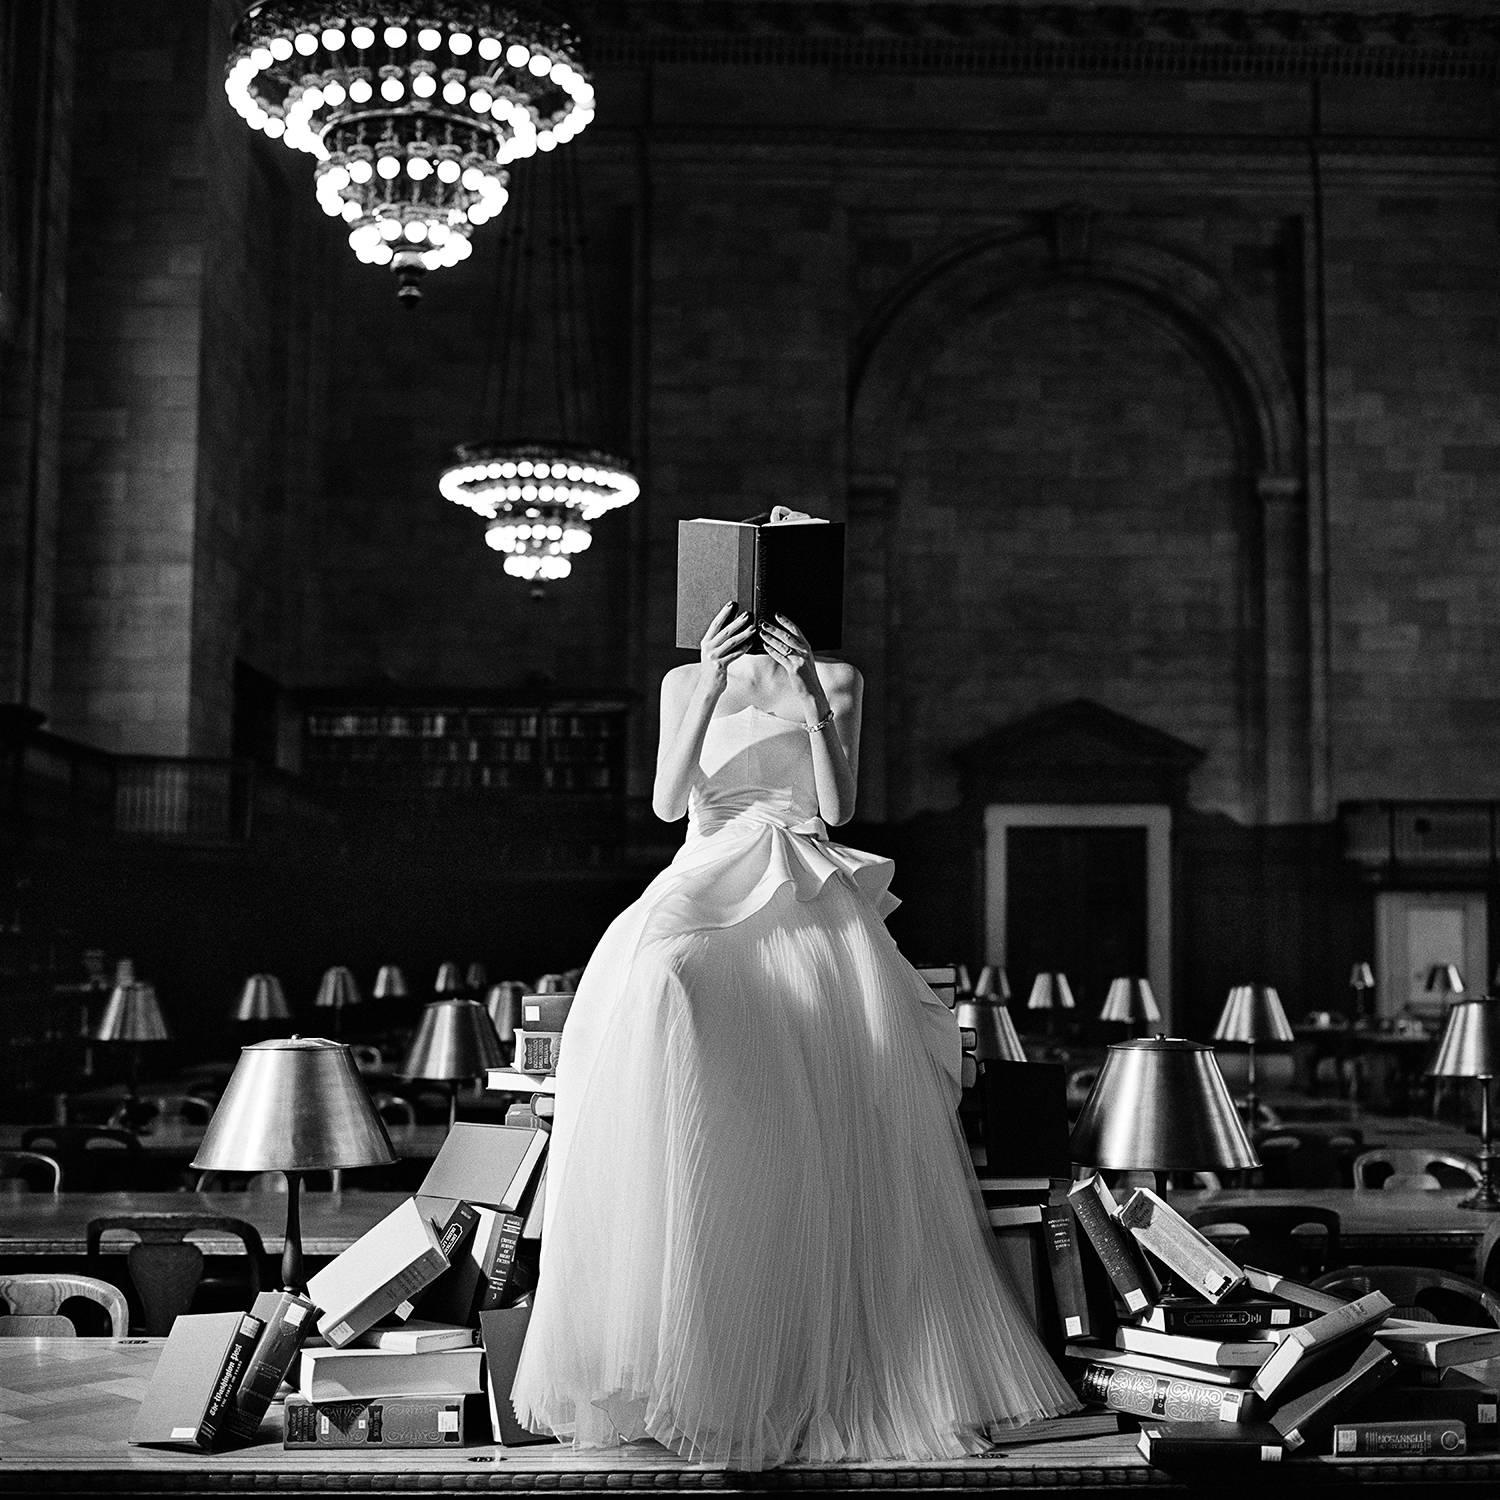 Rodney Smith Black and White Photograph - Flynn Reading on a Pile of Books- 20 x 20 inch black and white fashion photo